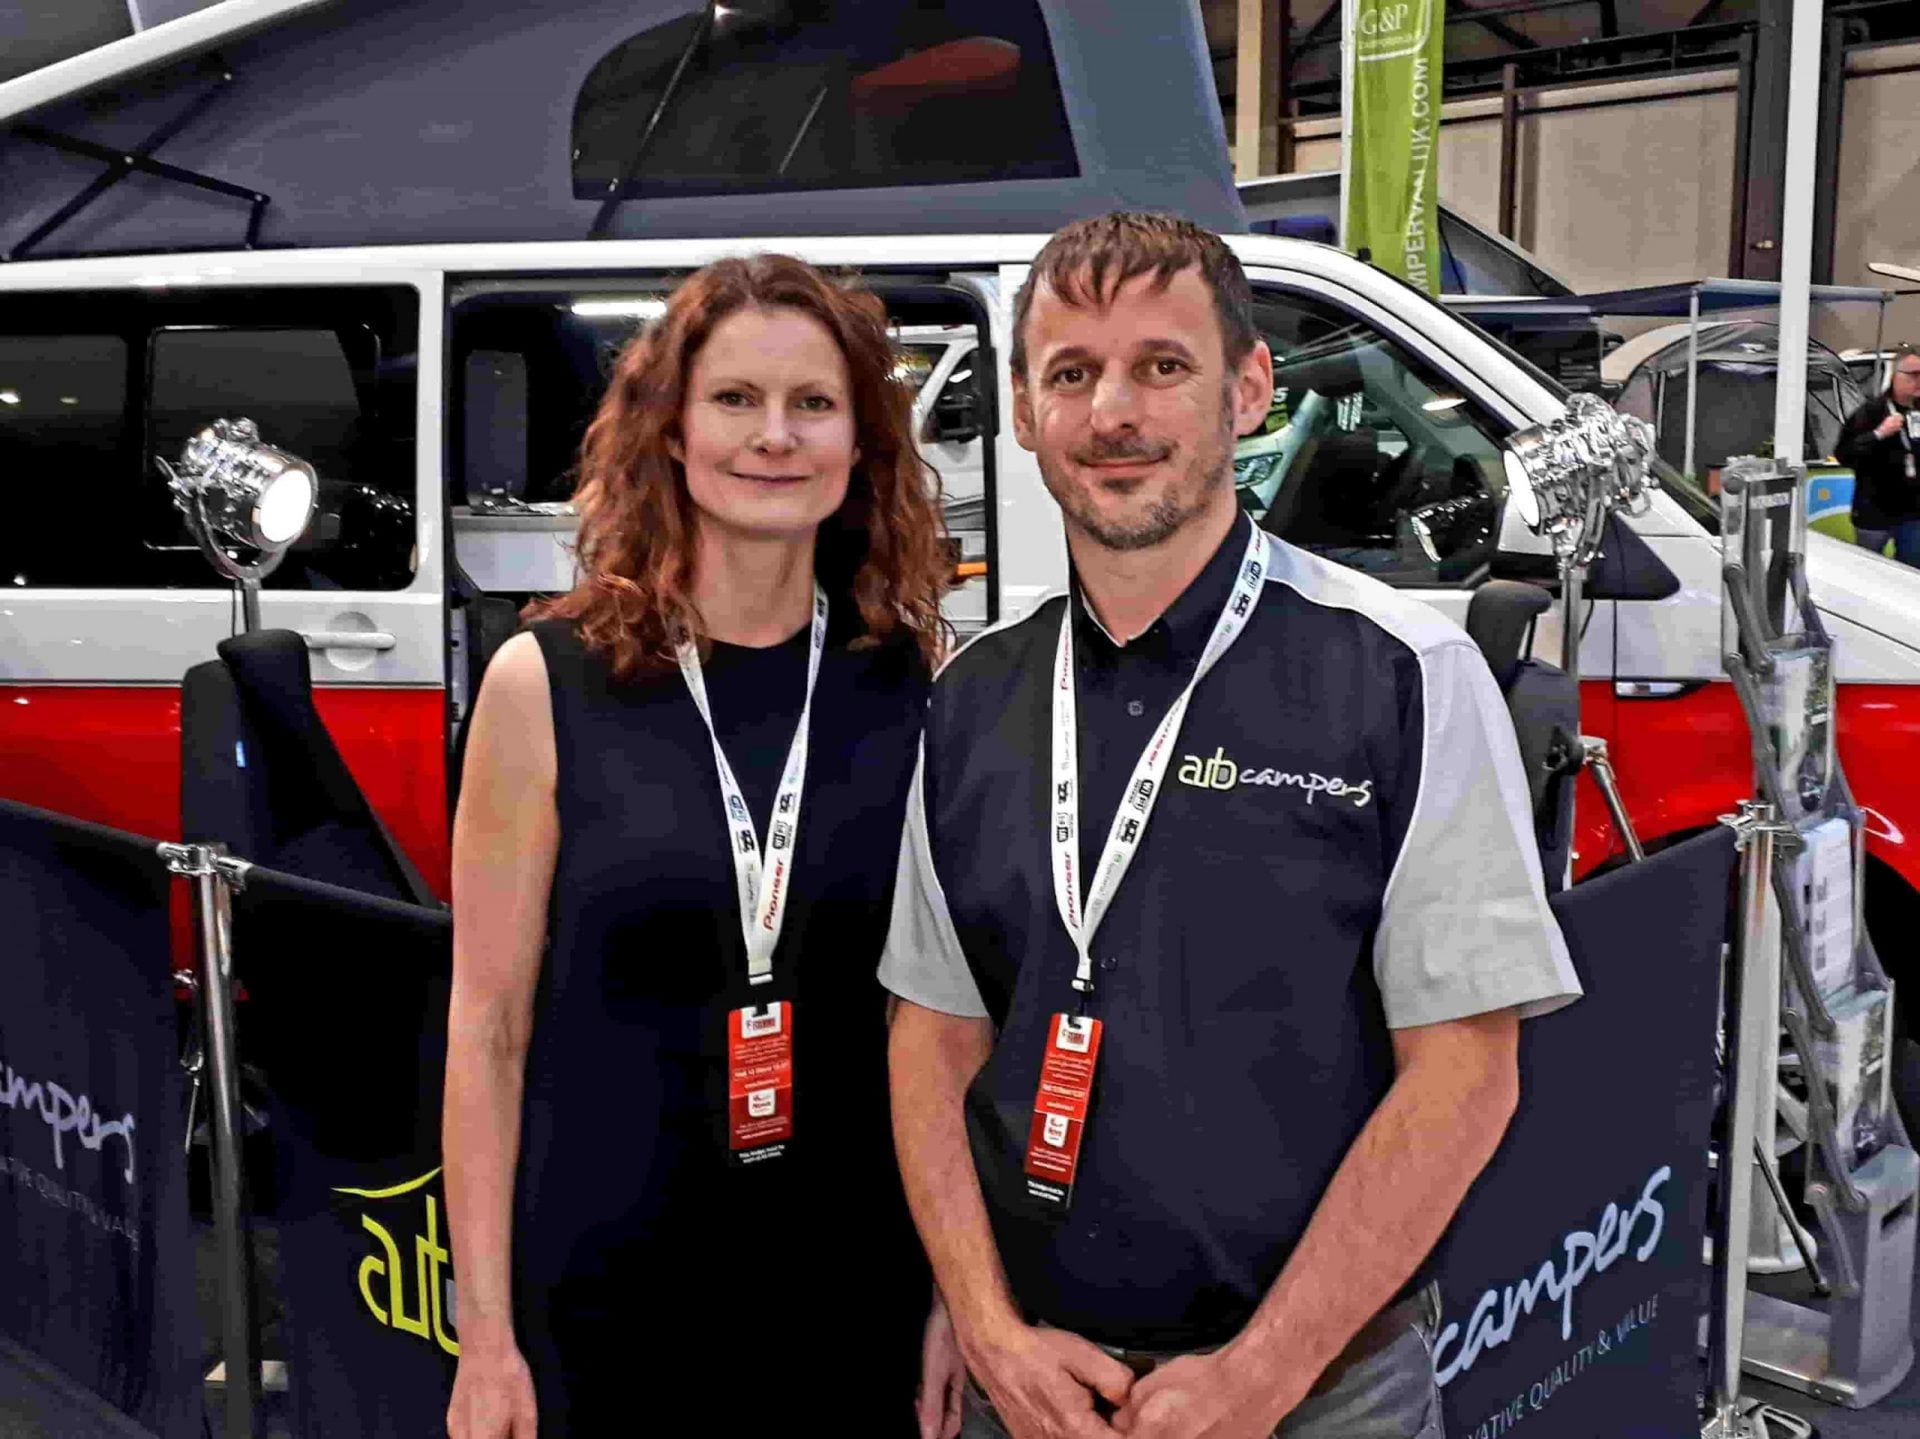 Mark and Alicia of Highland Auto Campers